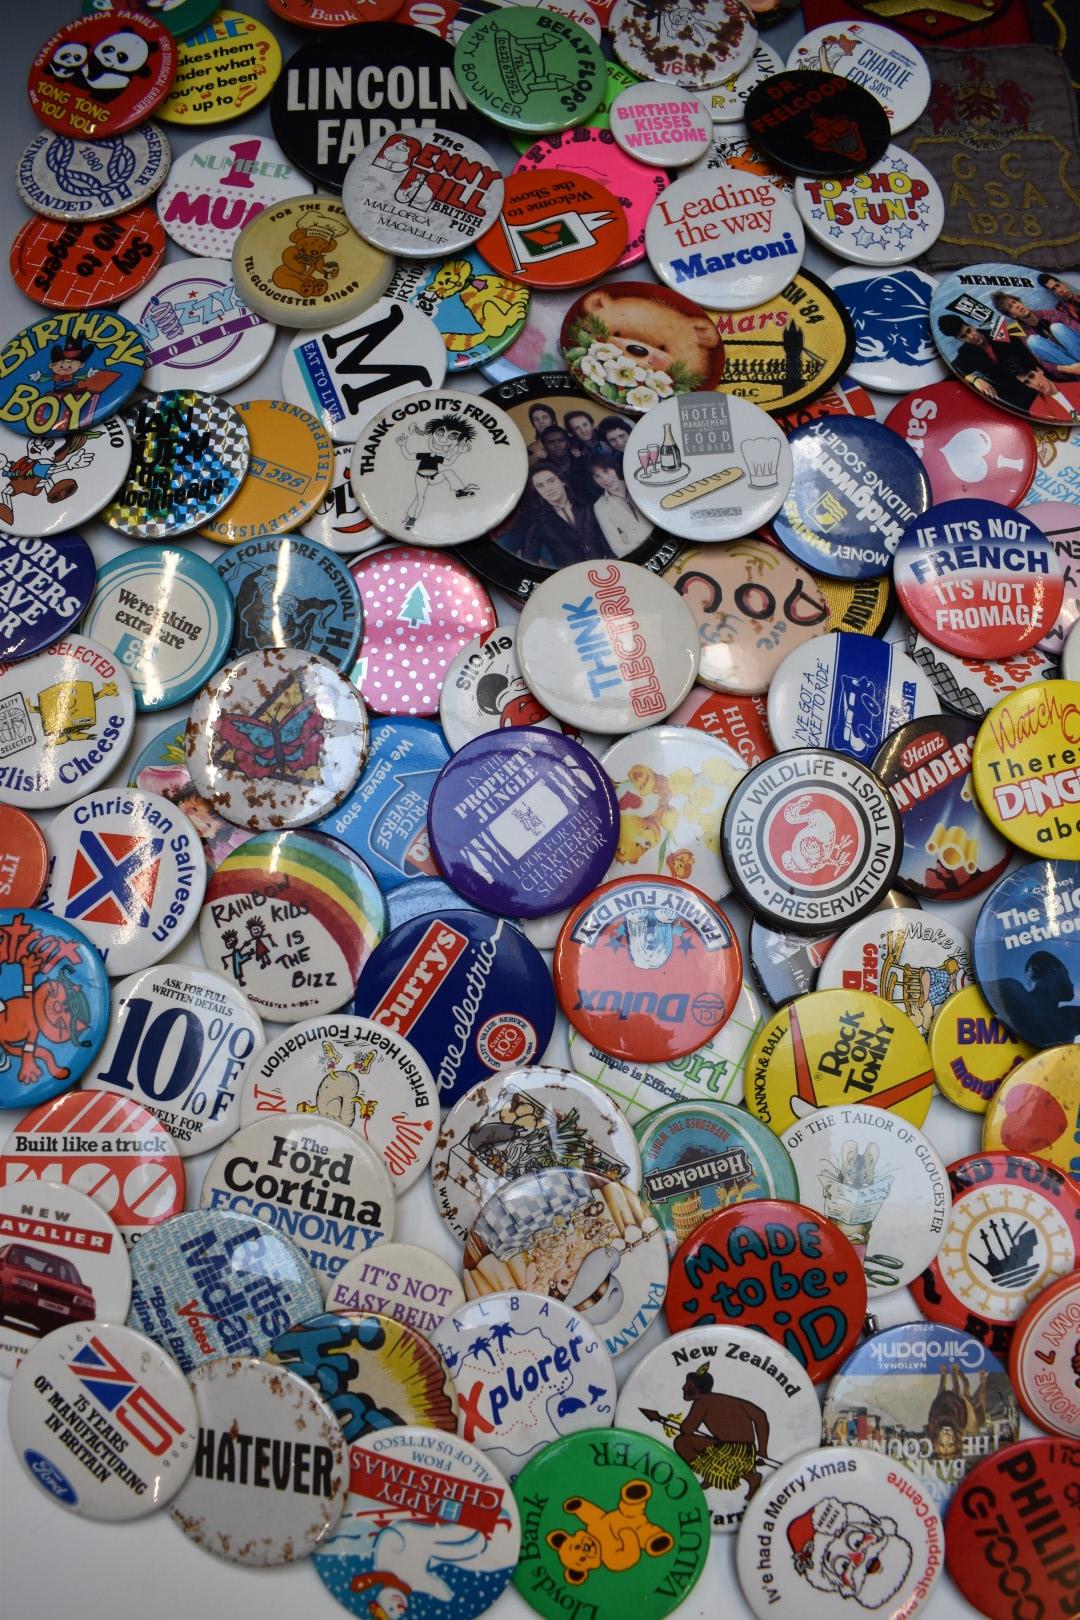 Over 1000 vintage and collectable badges including social history, advertising, humorous, slogans, - Image 5 of 9